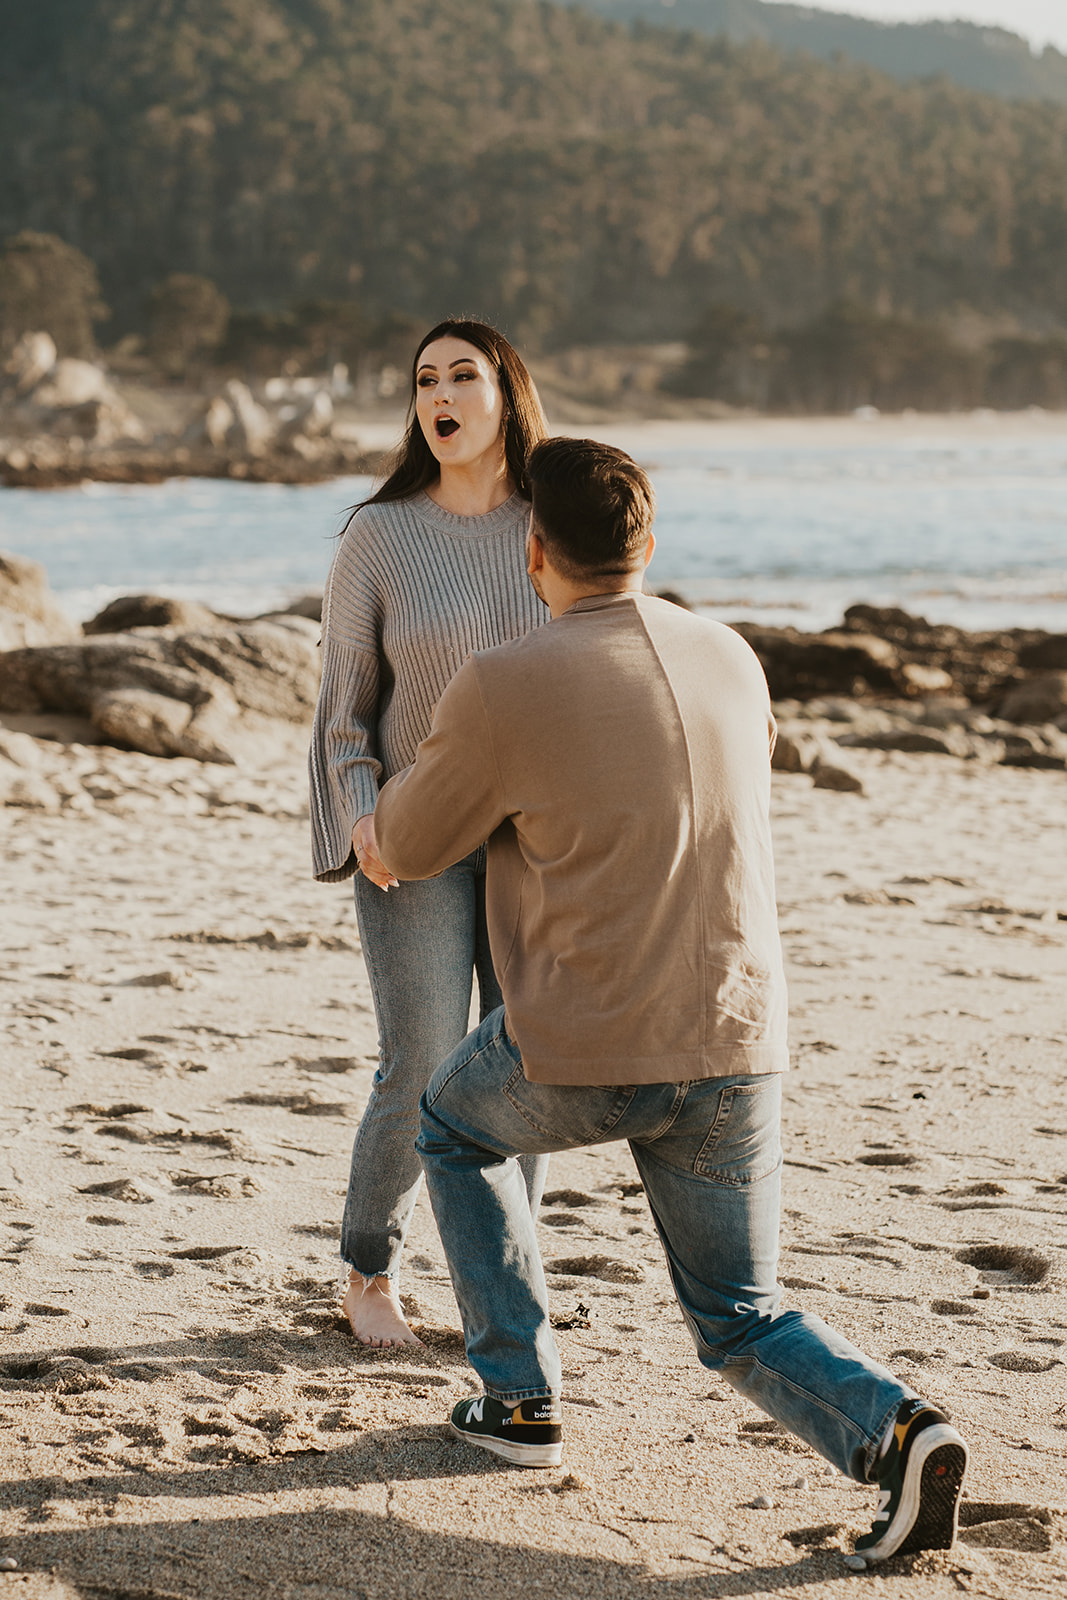 Shocked face as she's proposed to on the beach in Carmel-by-the-Sea